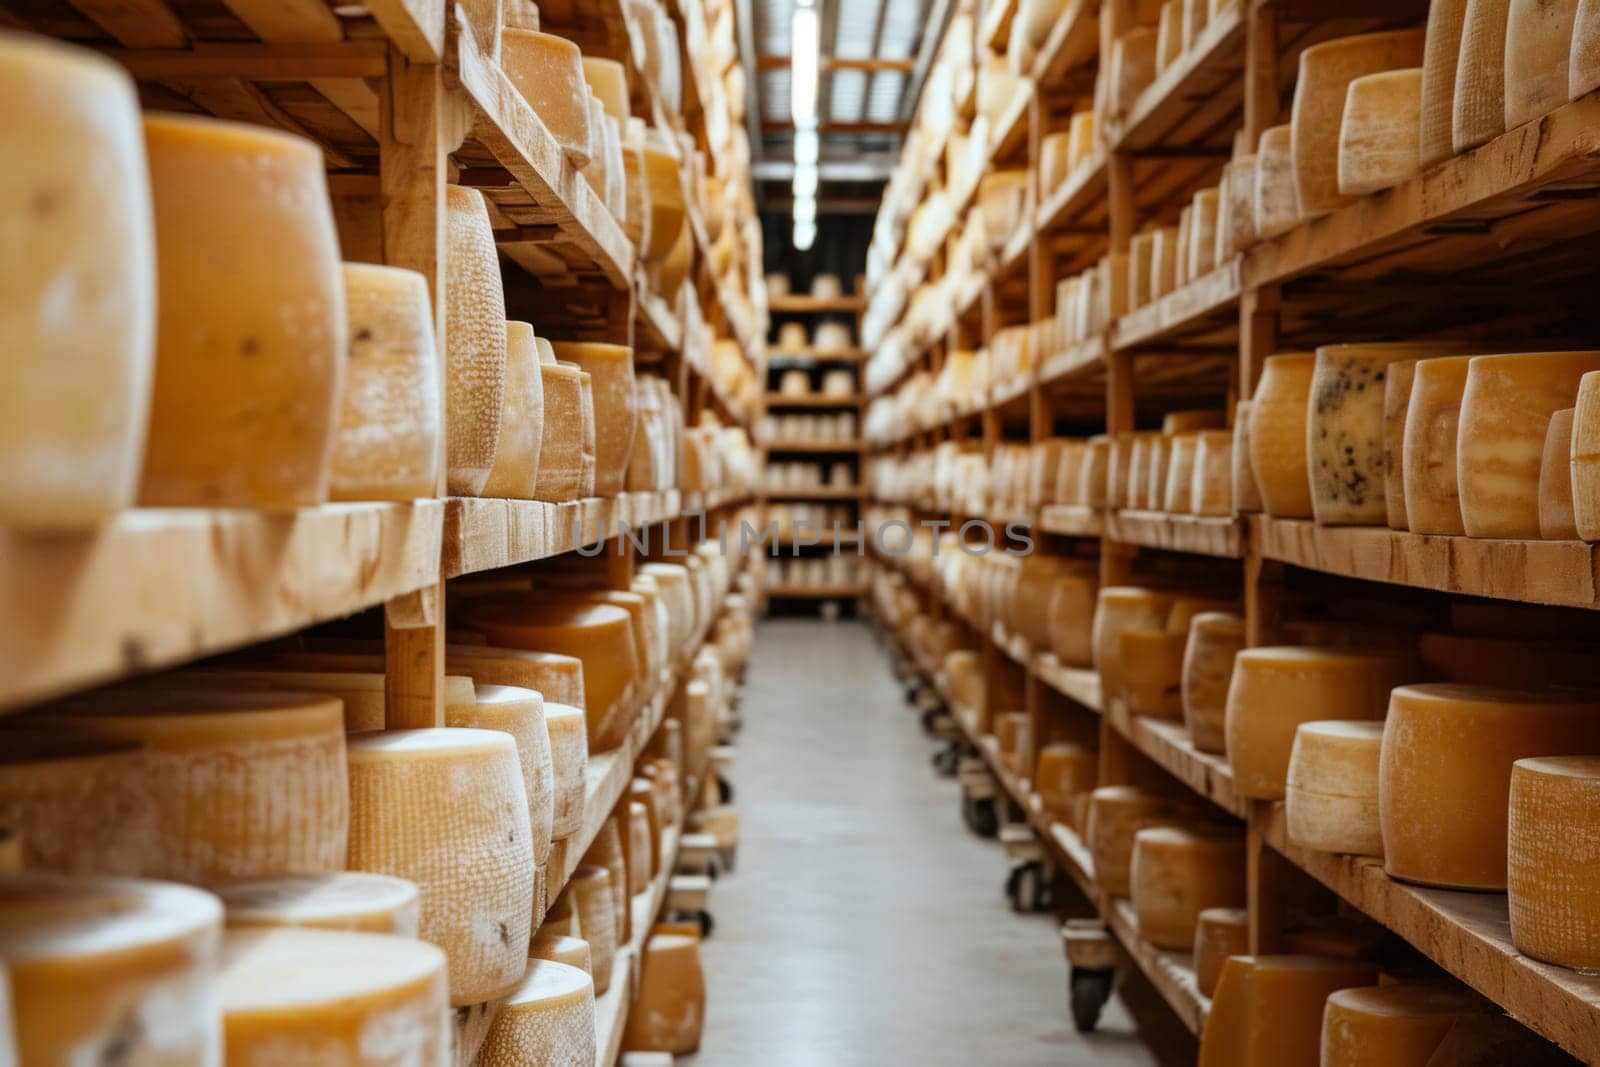 Parmesan cheese aging on shelves in factory warehouse, cheese production concept